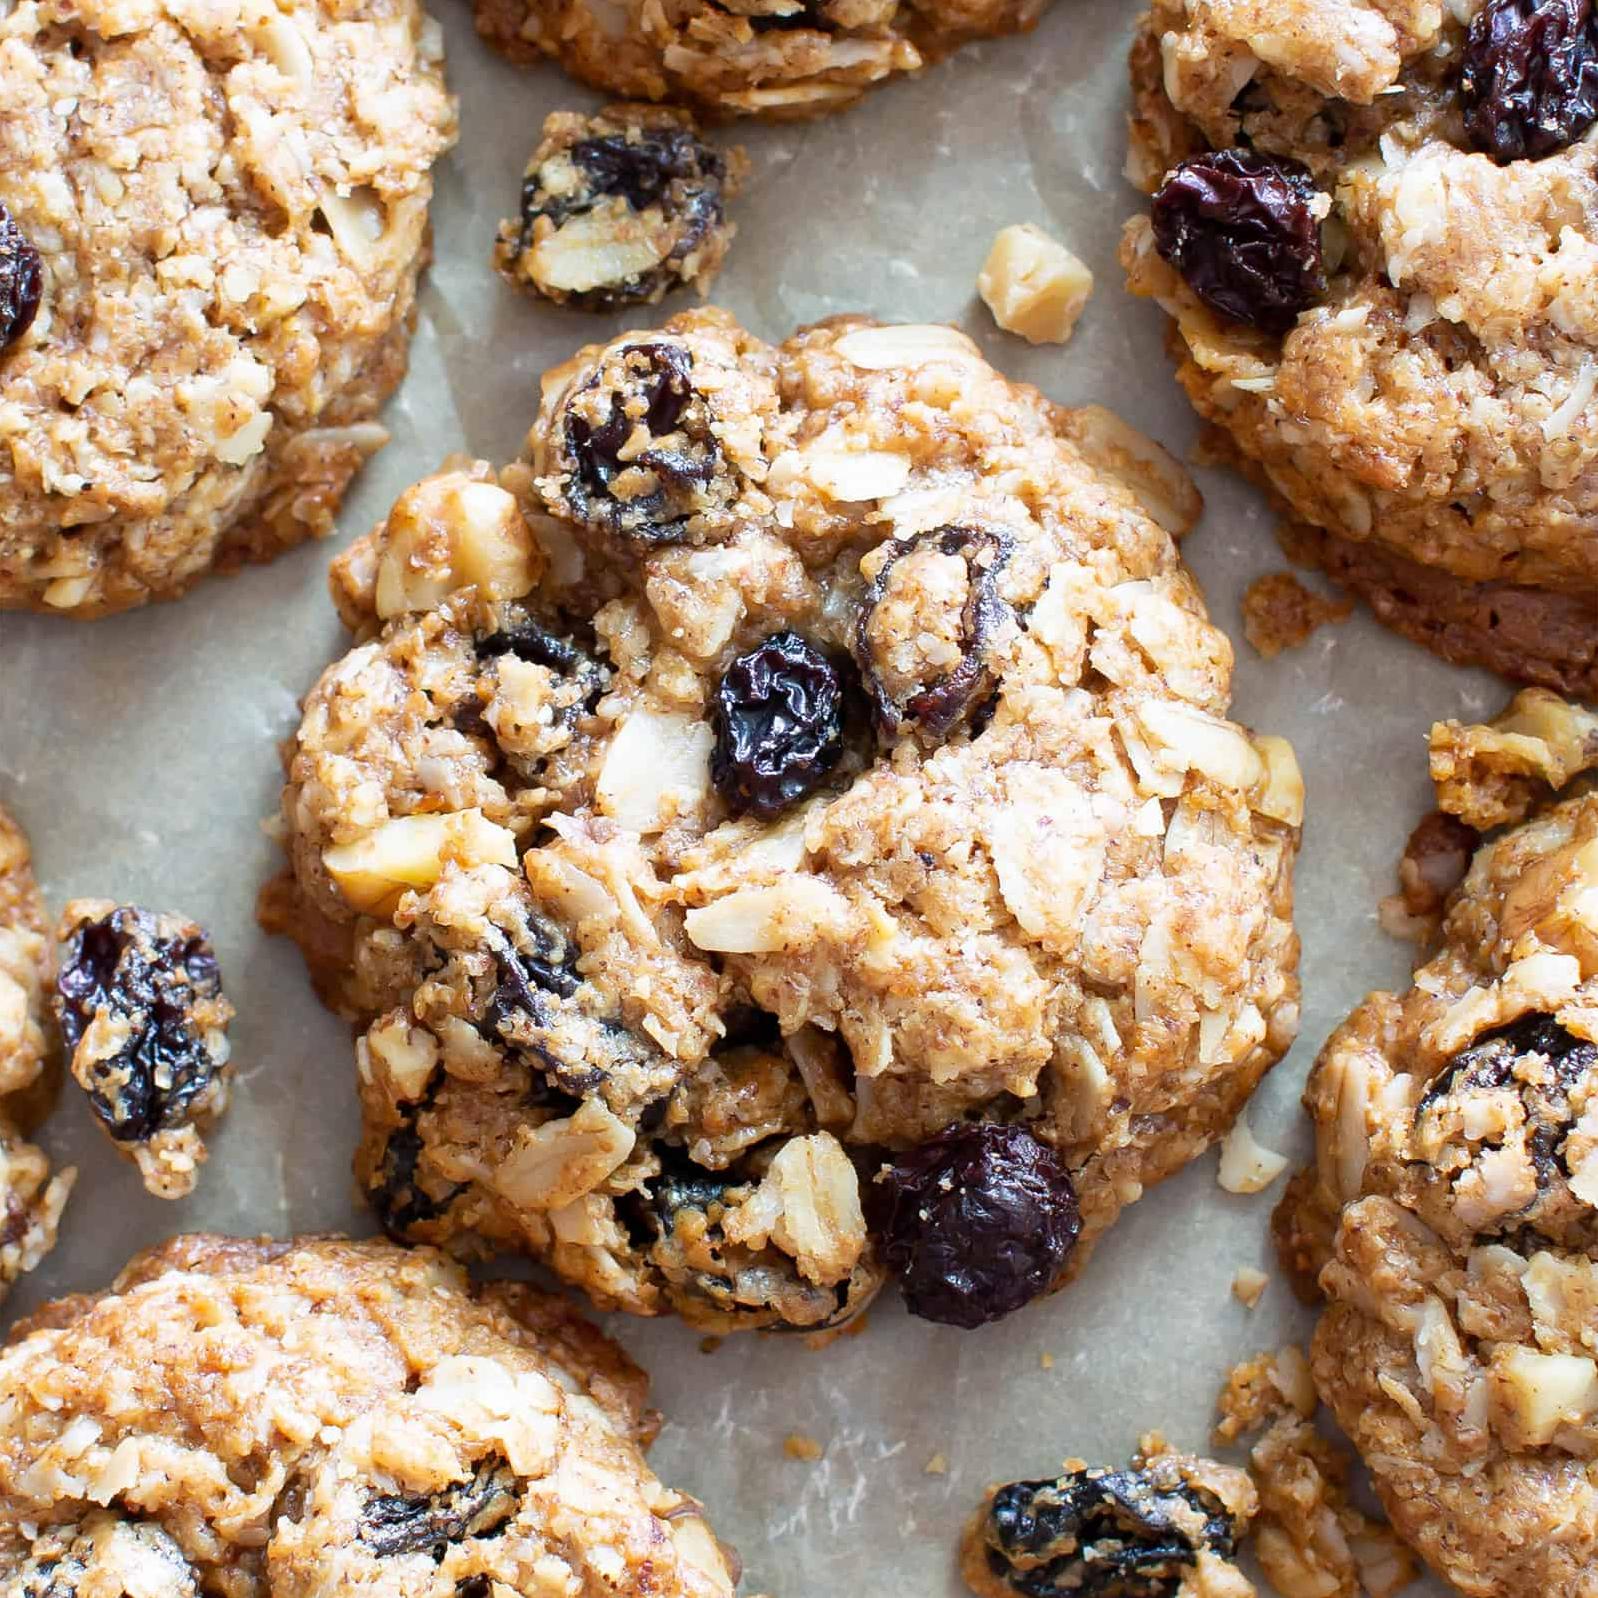  These cookies are easy to make and a great way to use up any leftover oats and raisins.